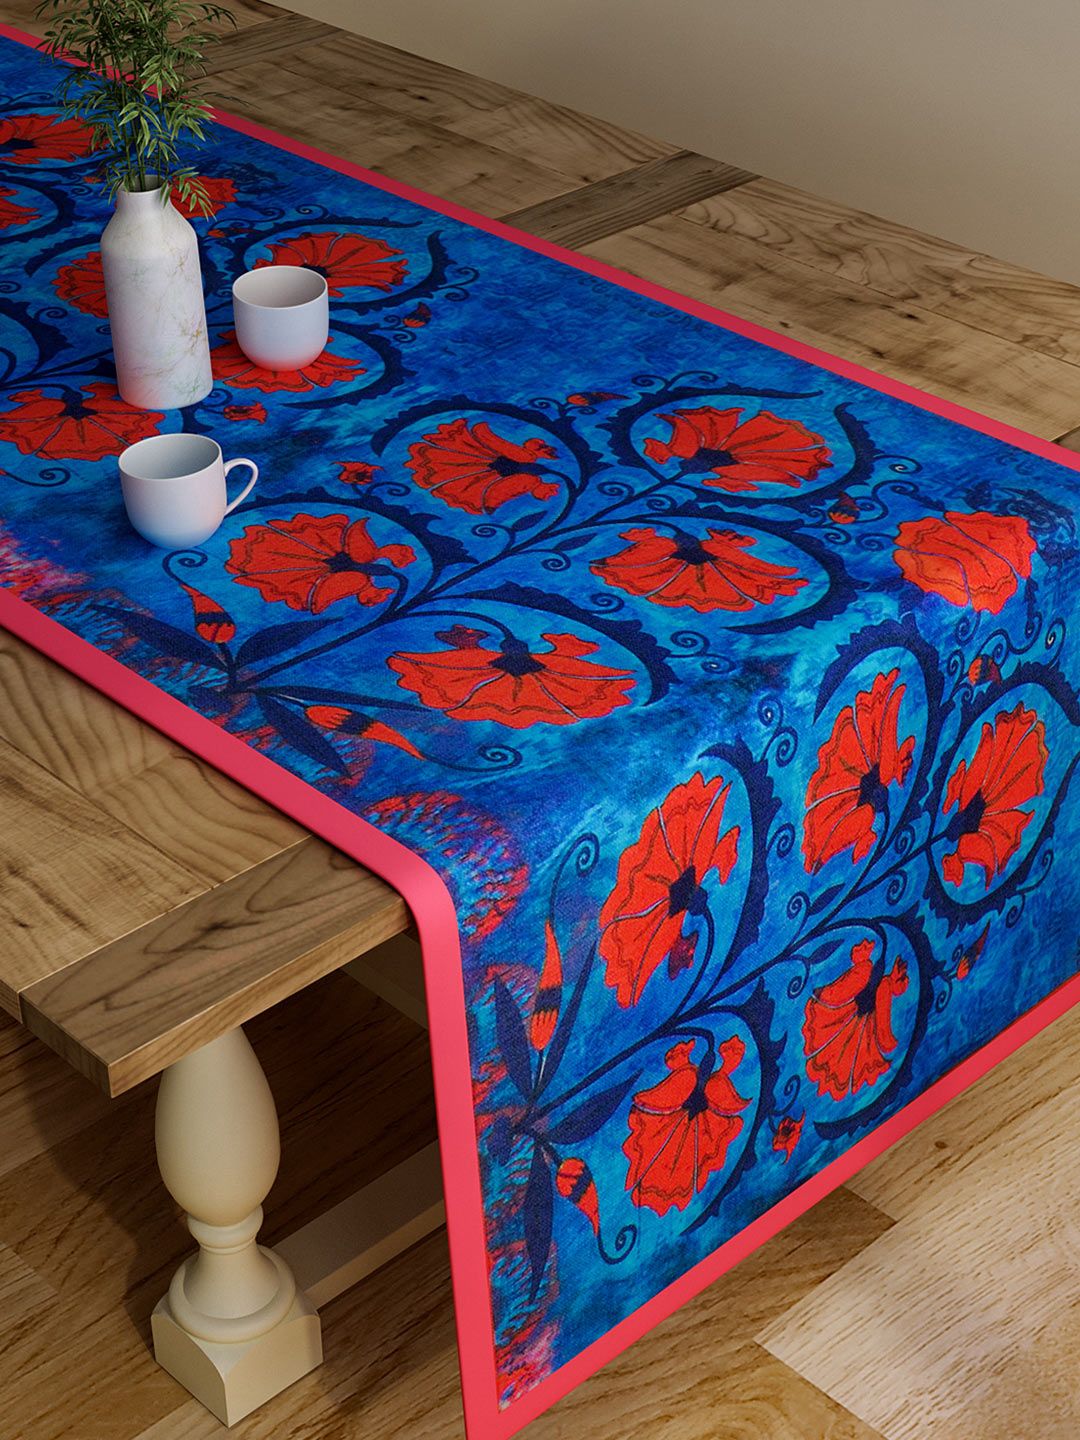 SEJ by Nisha Gupta Blue & Red Floral Print Rectangular 48" x 13" Cotton Table Runner Price in India